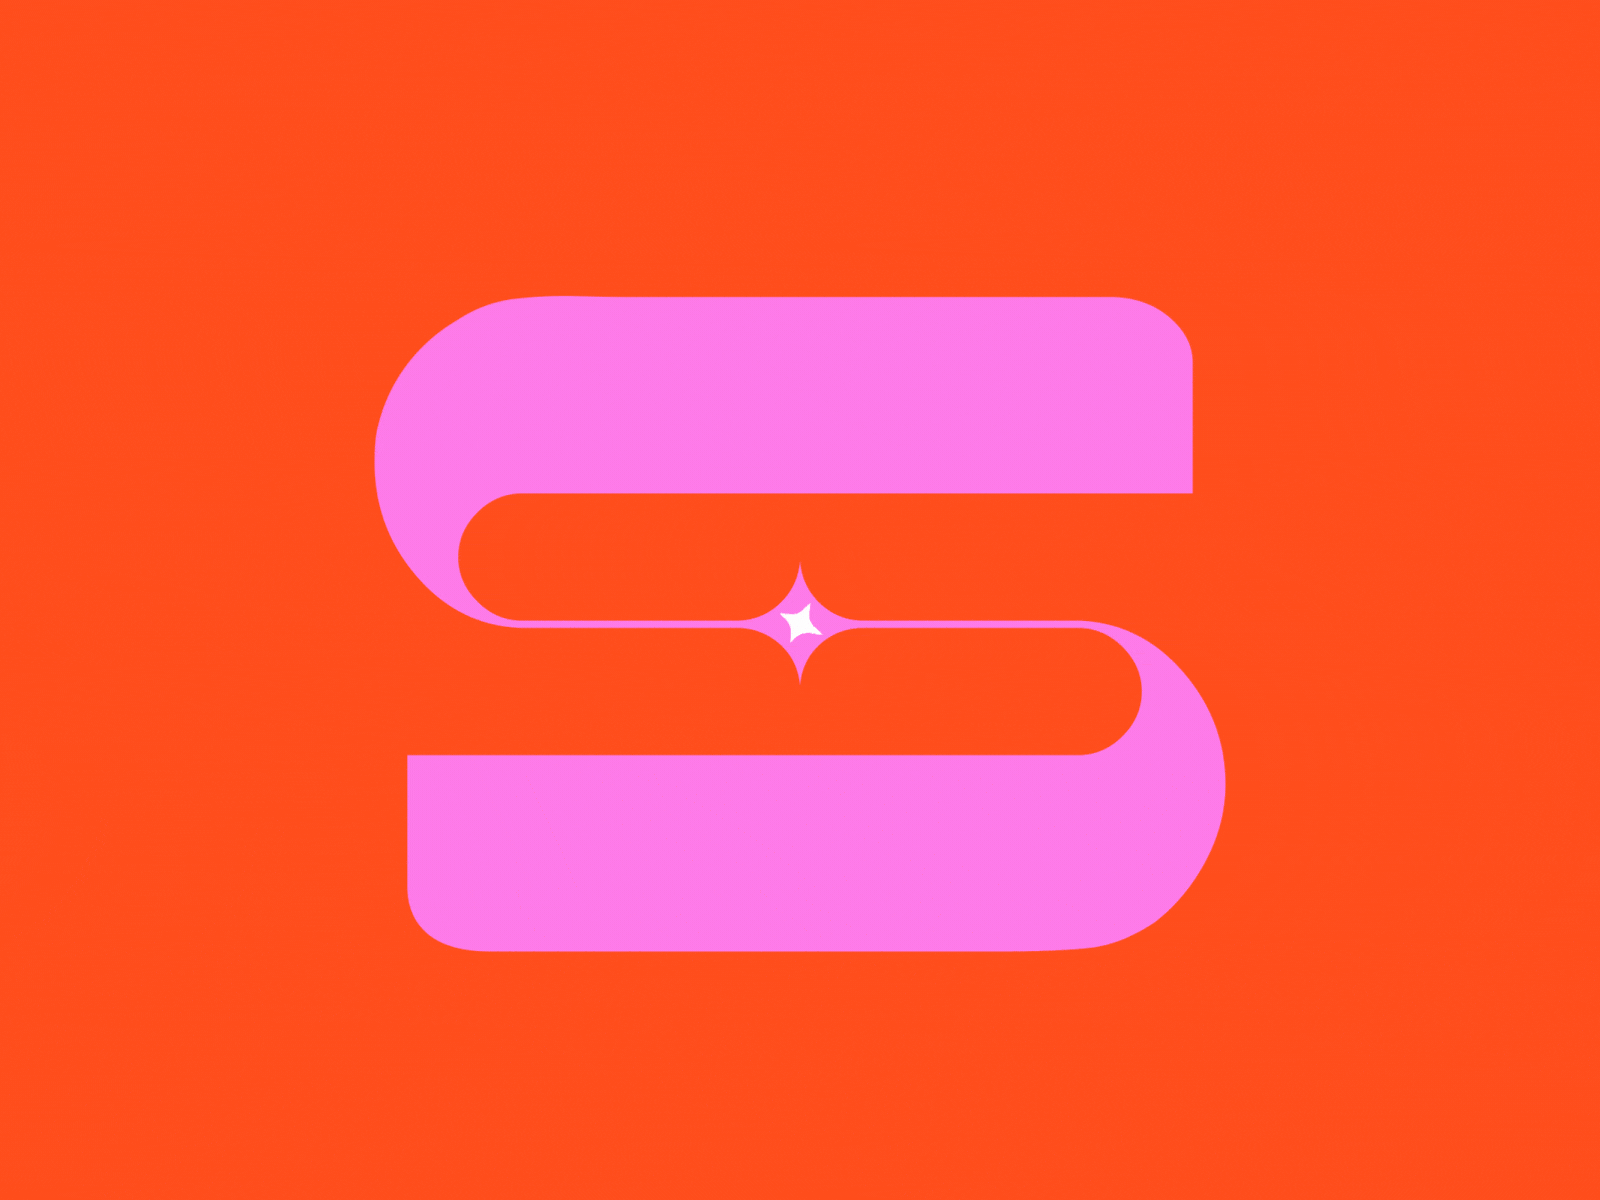 36 Days of Type / S 36 days of type 36daysoftye08 36daysoftype 36dot ae after effects animated animated type animation animography colors design kinetic kinetic type motion motion design motion graphic motion graphics type typography